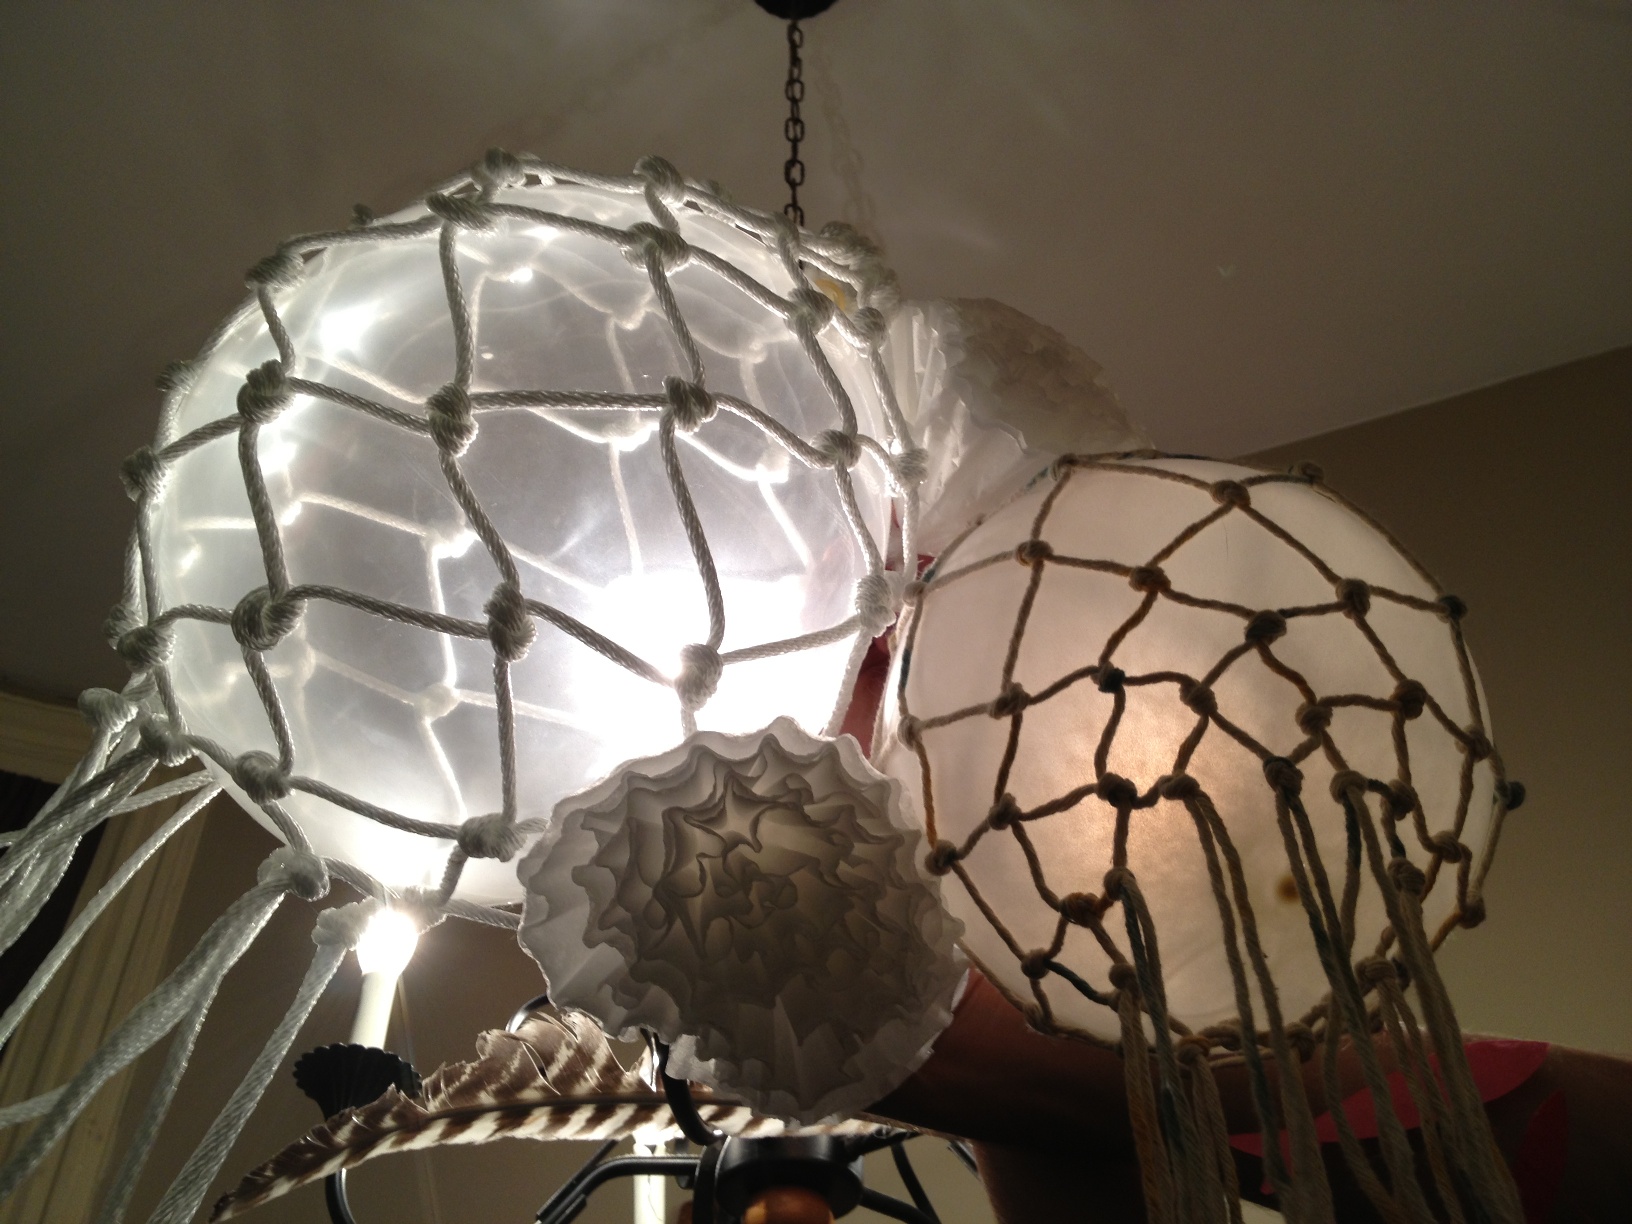 Prototype for cloud piece: an imitation of Japanese fishing floats